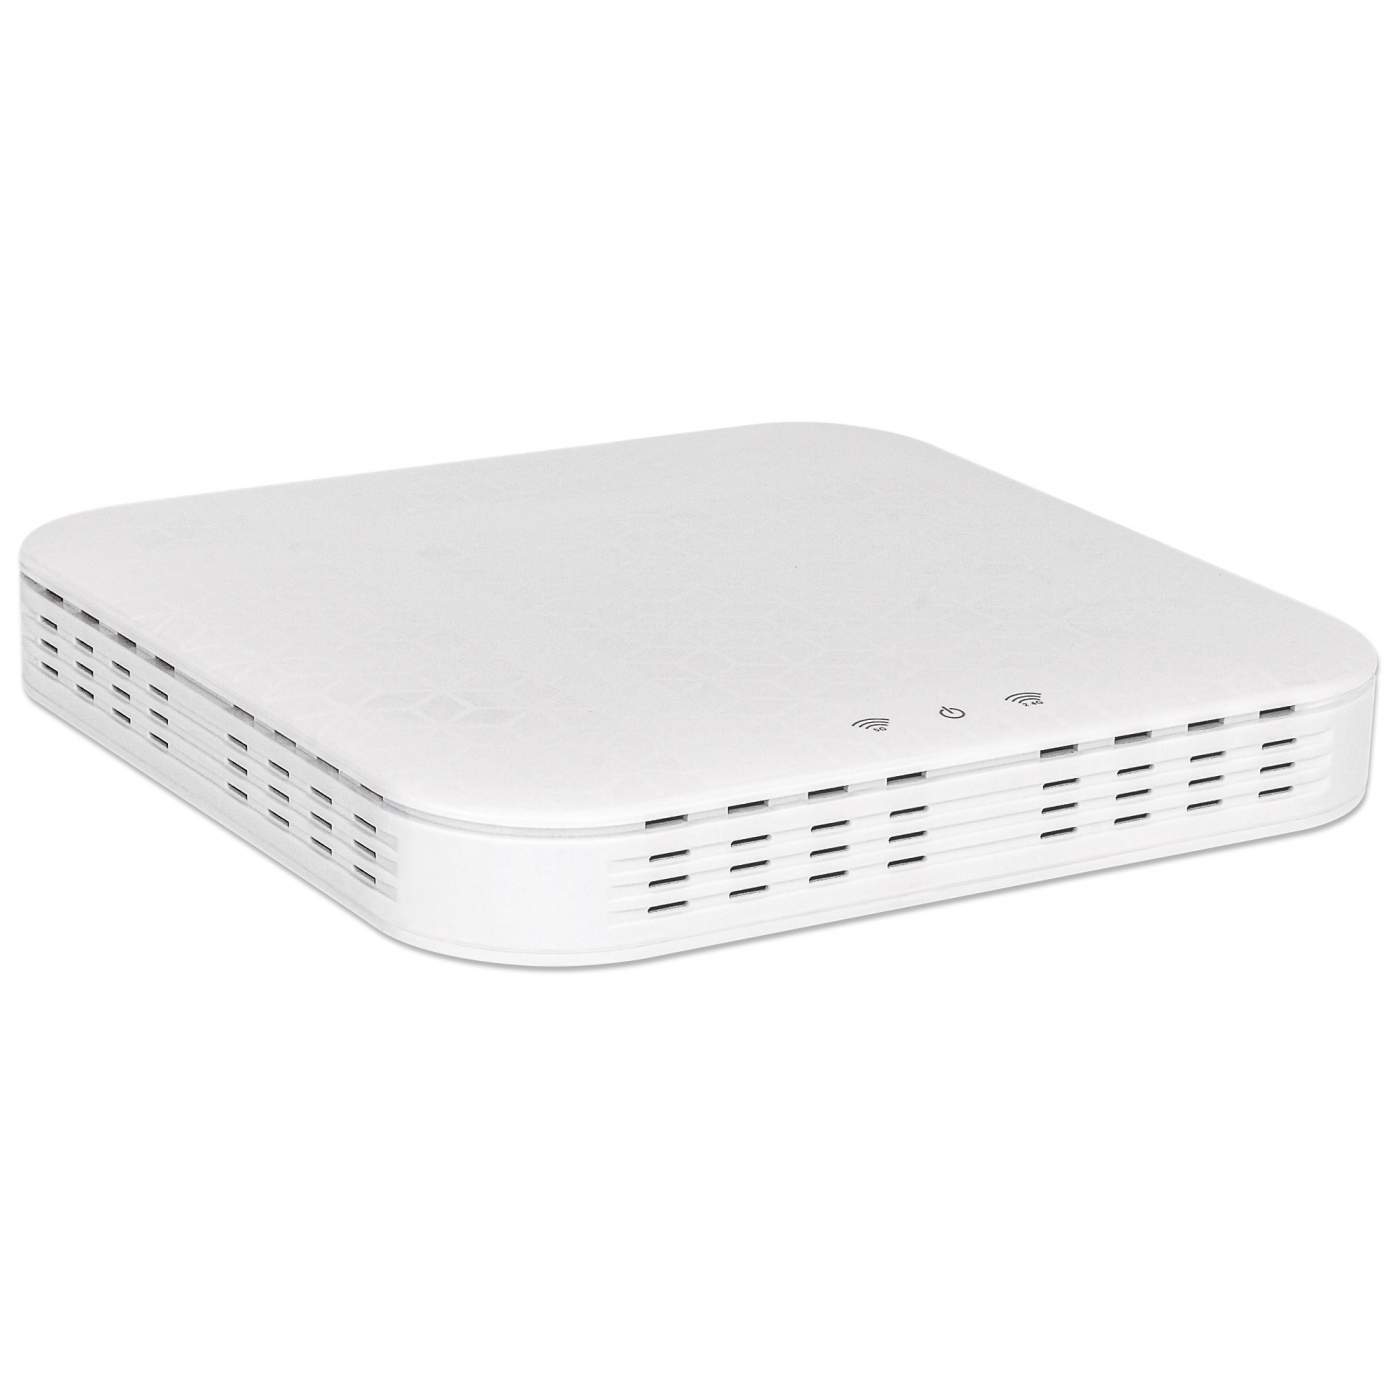 Manageable Wireless AC1300 Dual-Band Gigabit PoE Indoor Access Point and Router Image 2